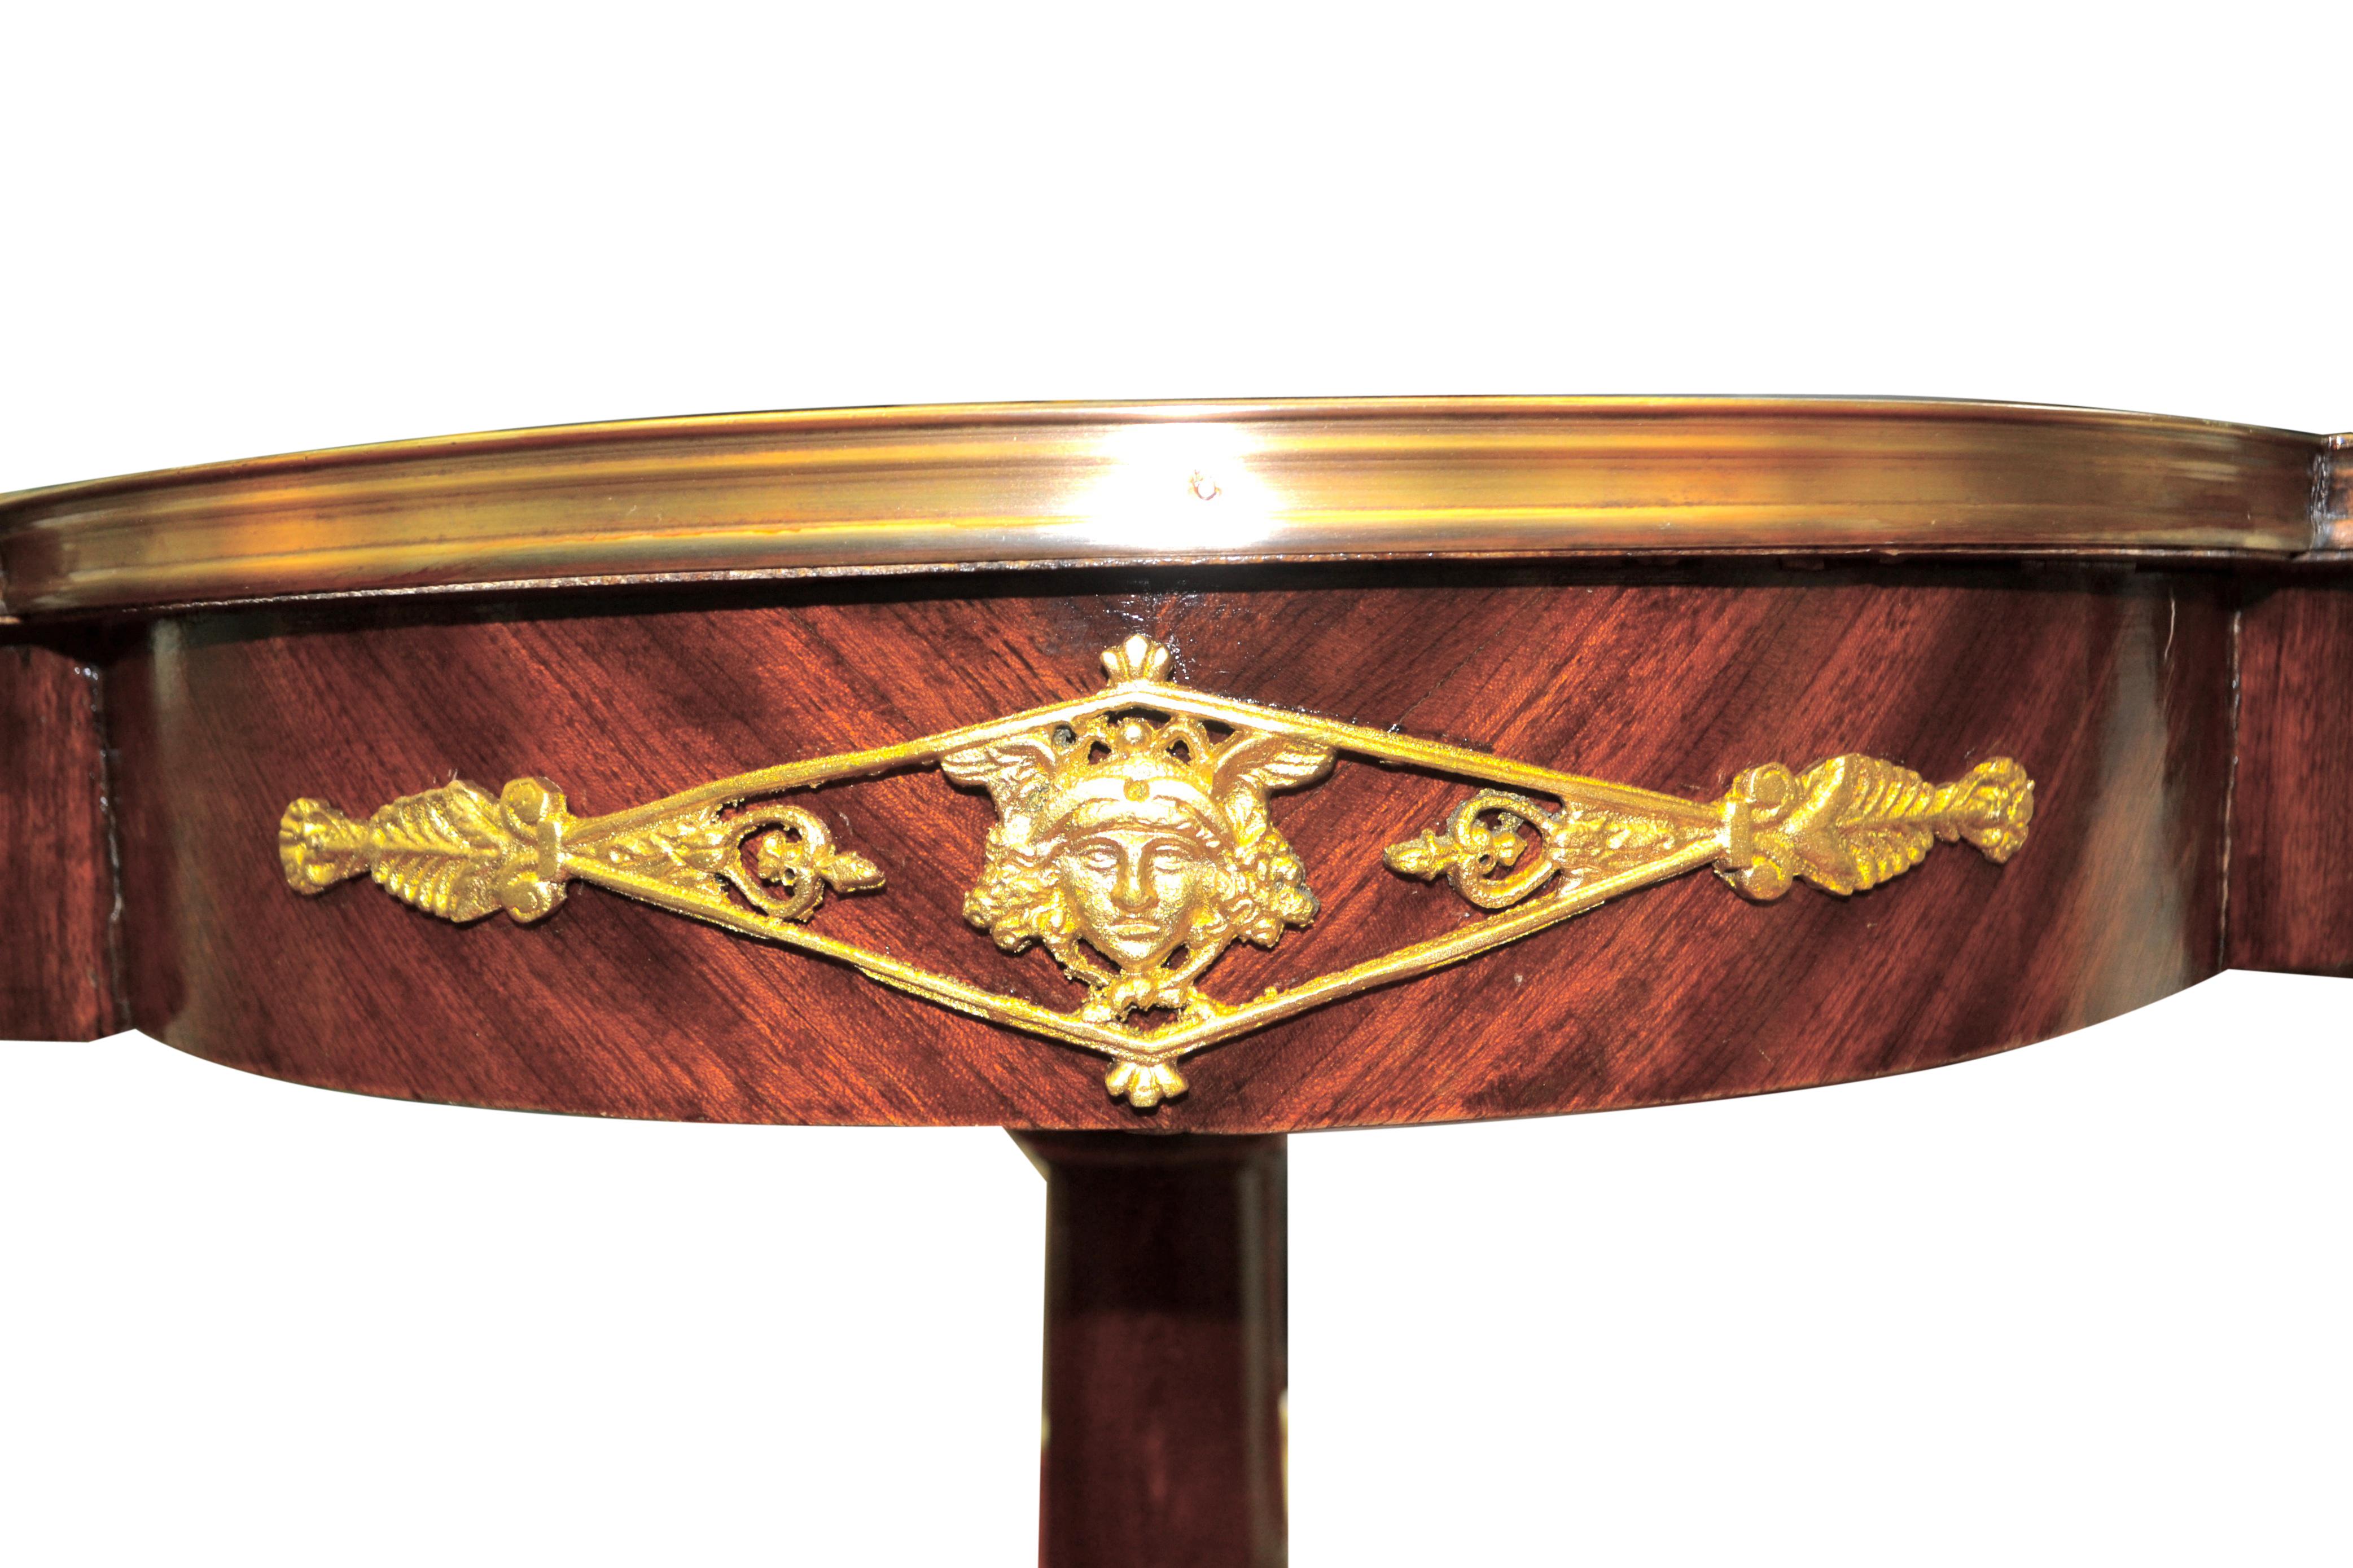 French Napoleon III Style Tulipwood and Mahogany Table In Good Condition For Sale In Vancouver, British Columbia